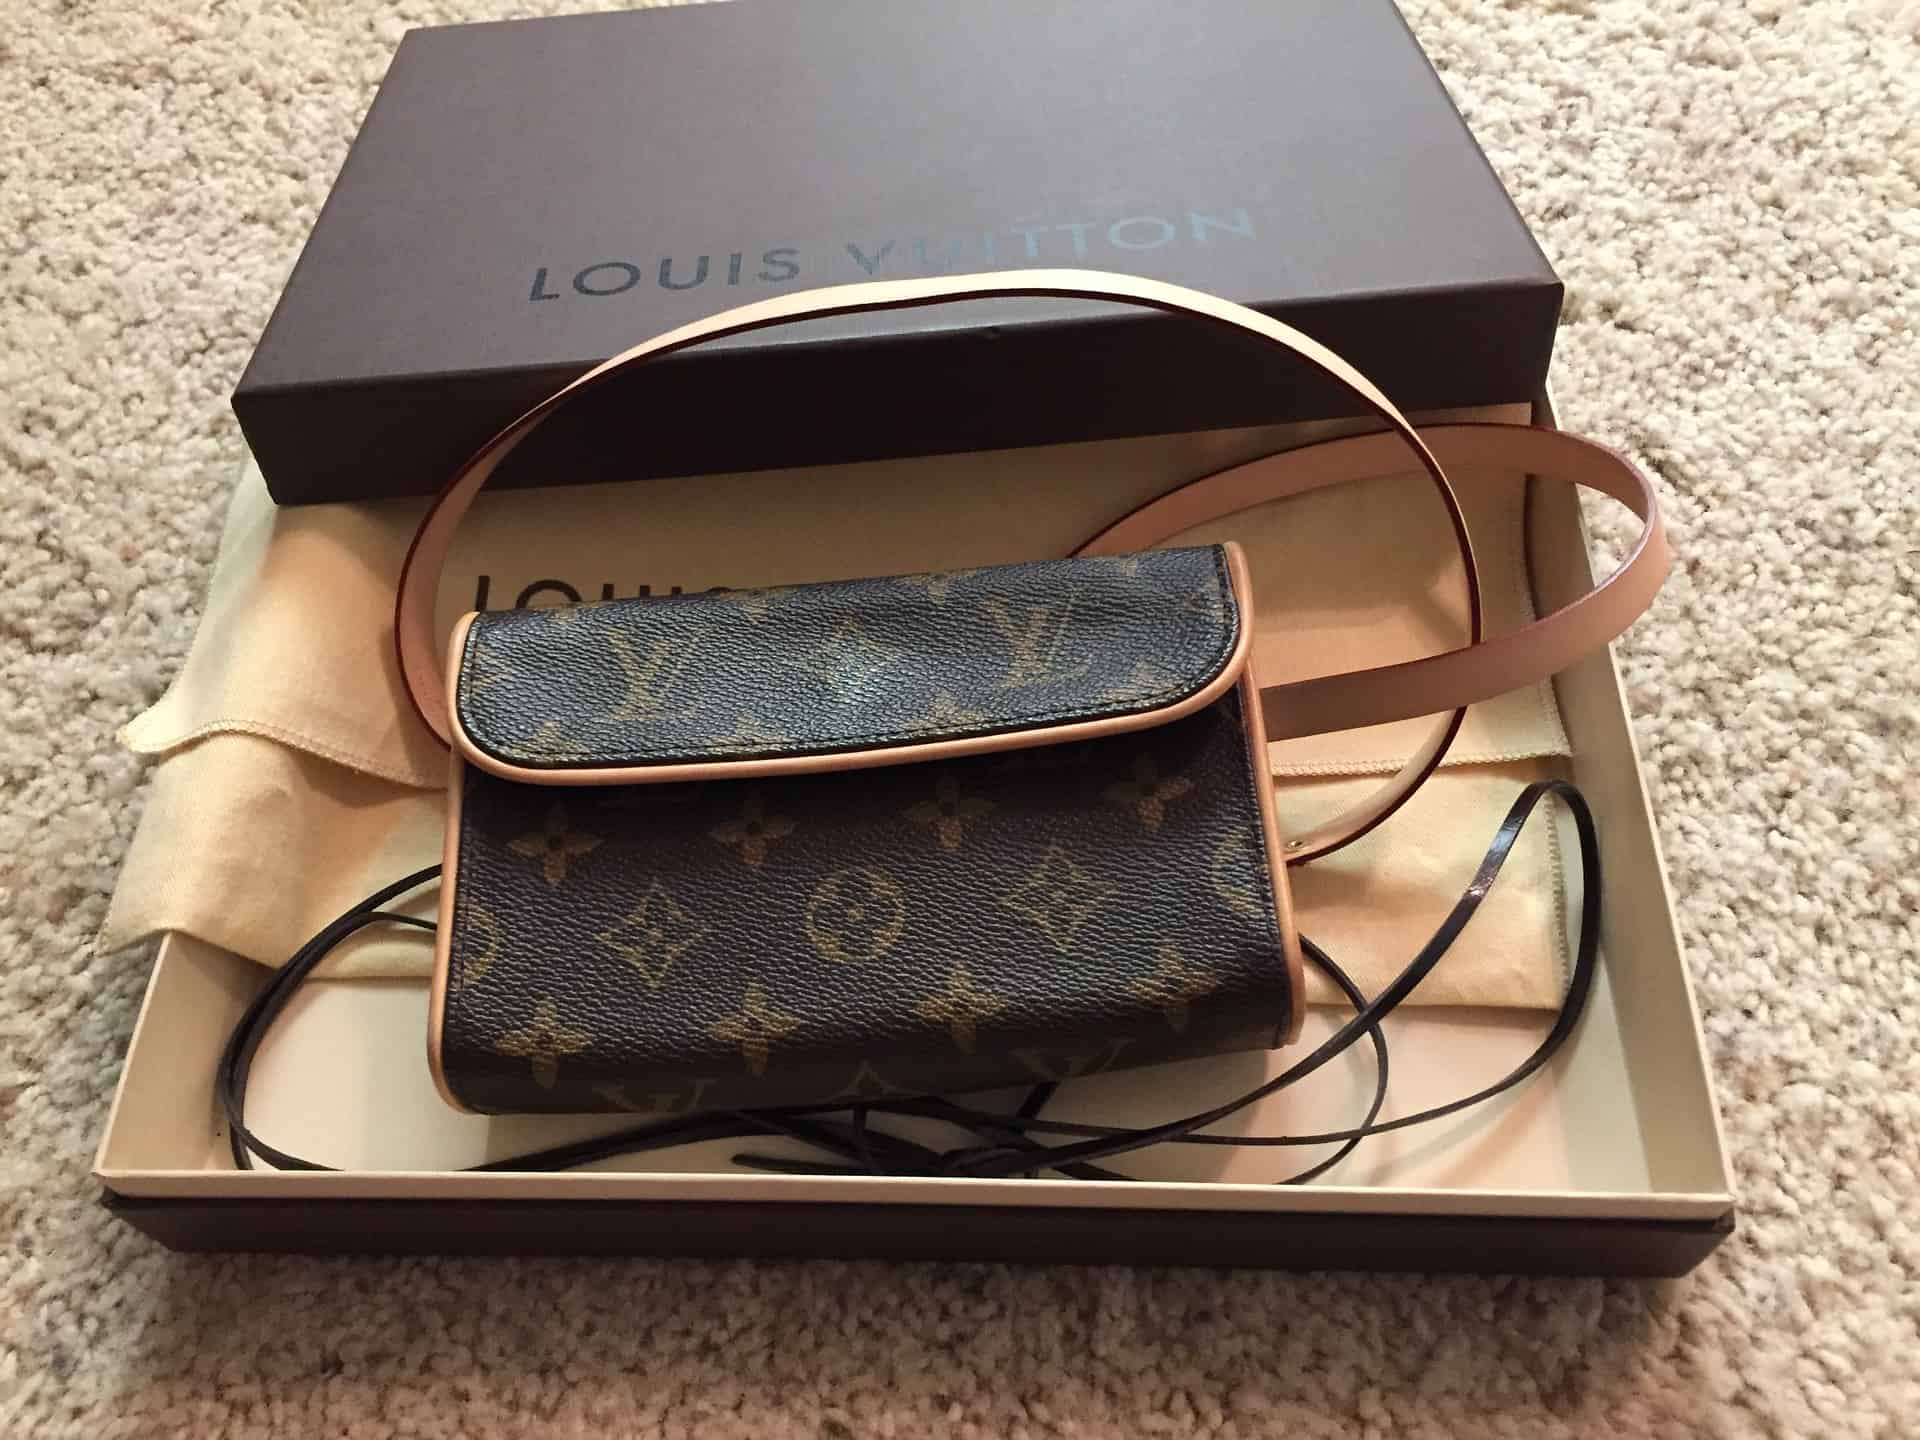 How To Buy Authentic Louis Vuitton Bags From Japan On